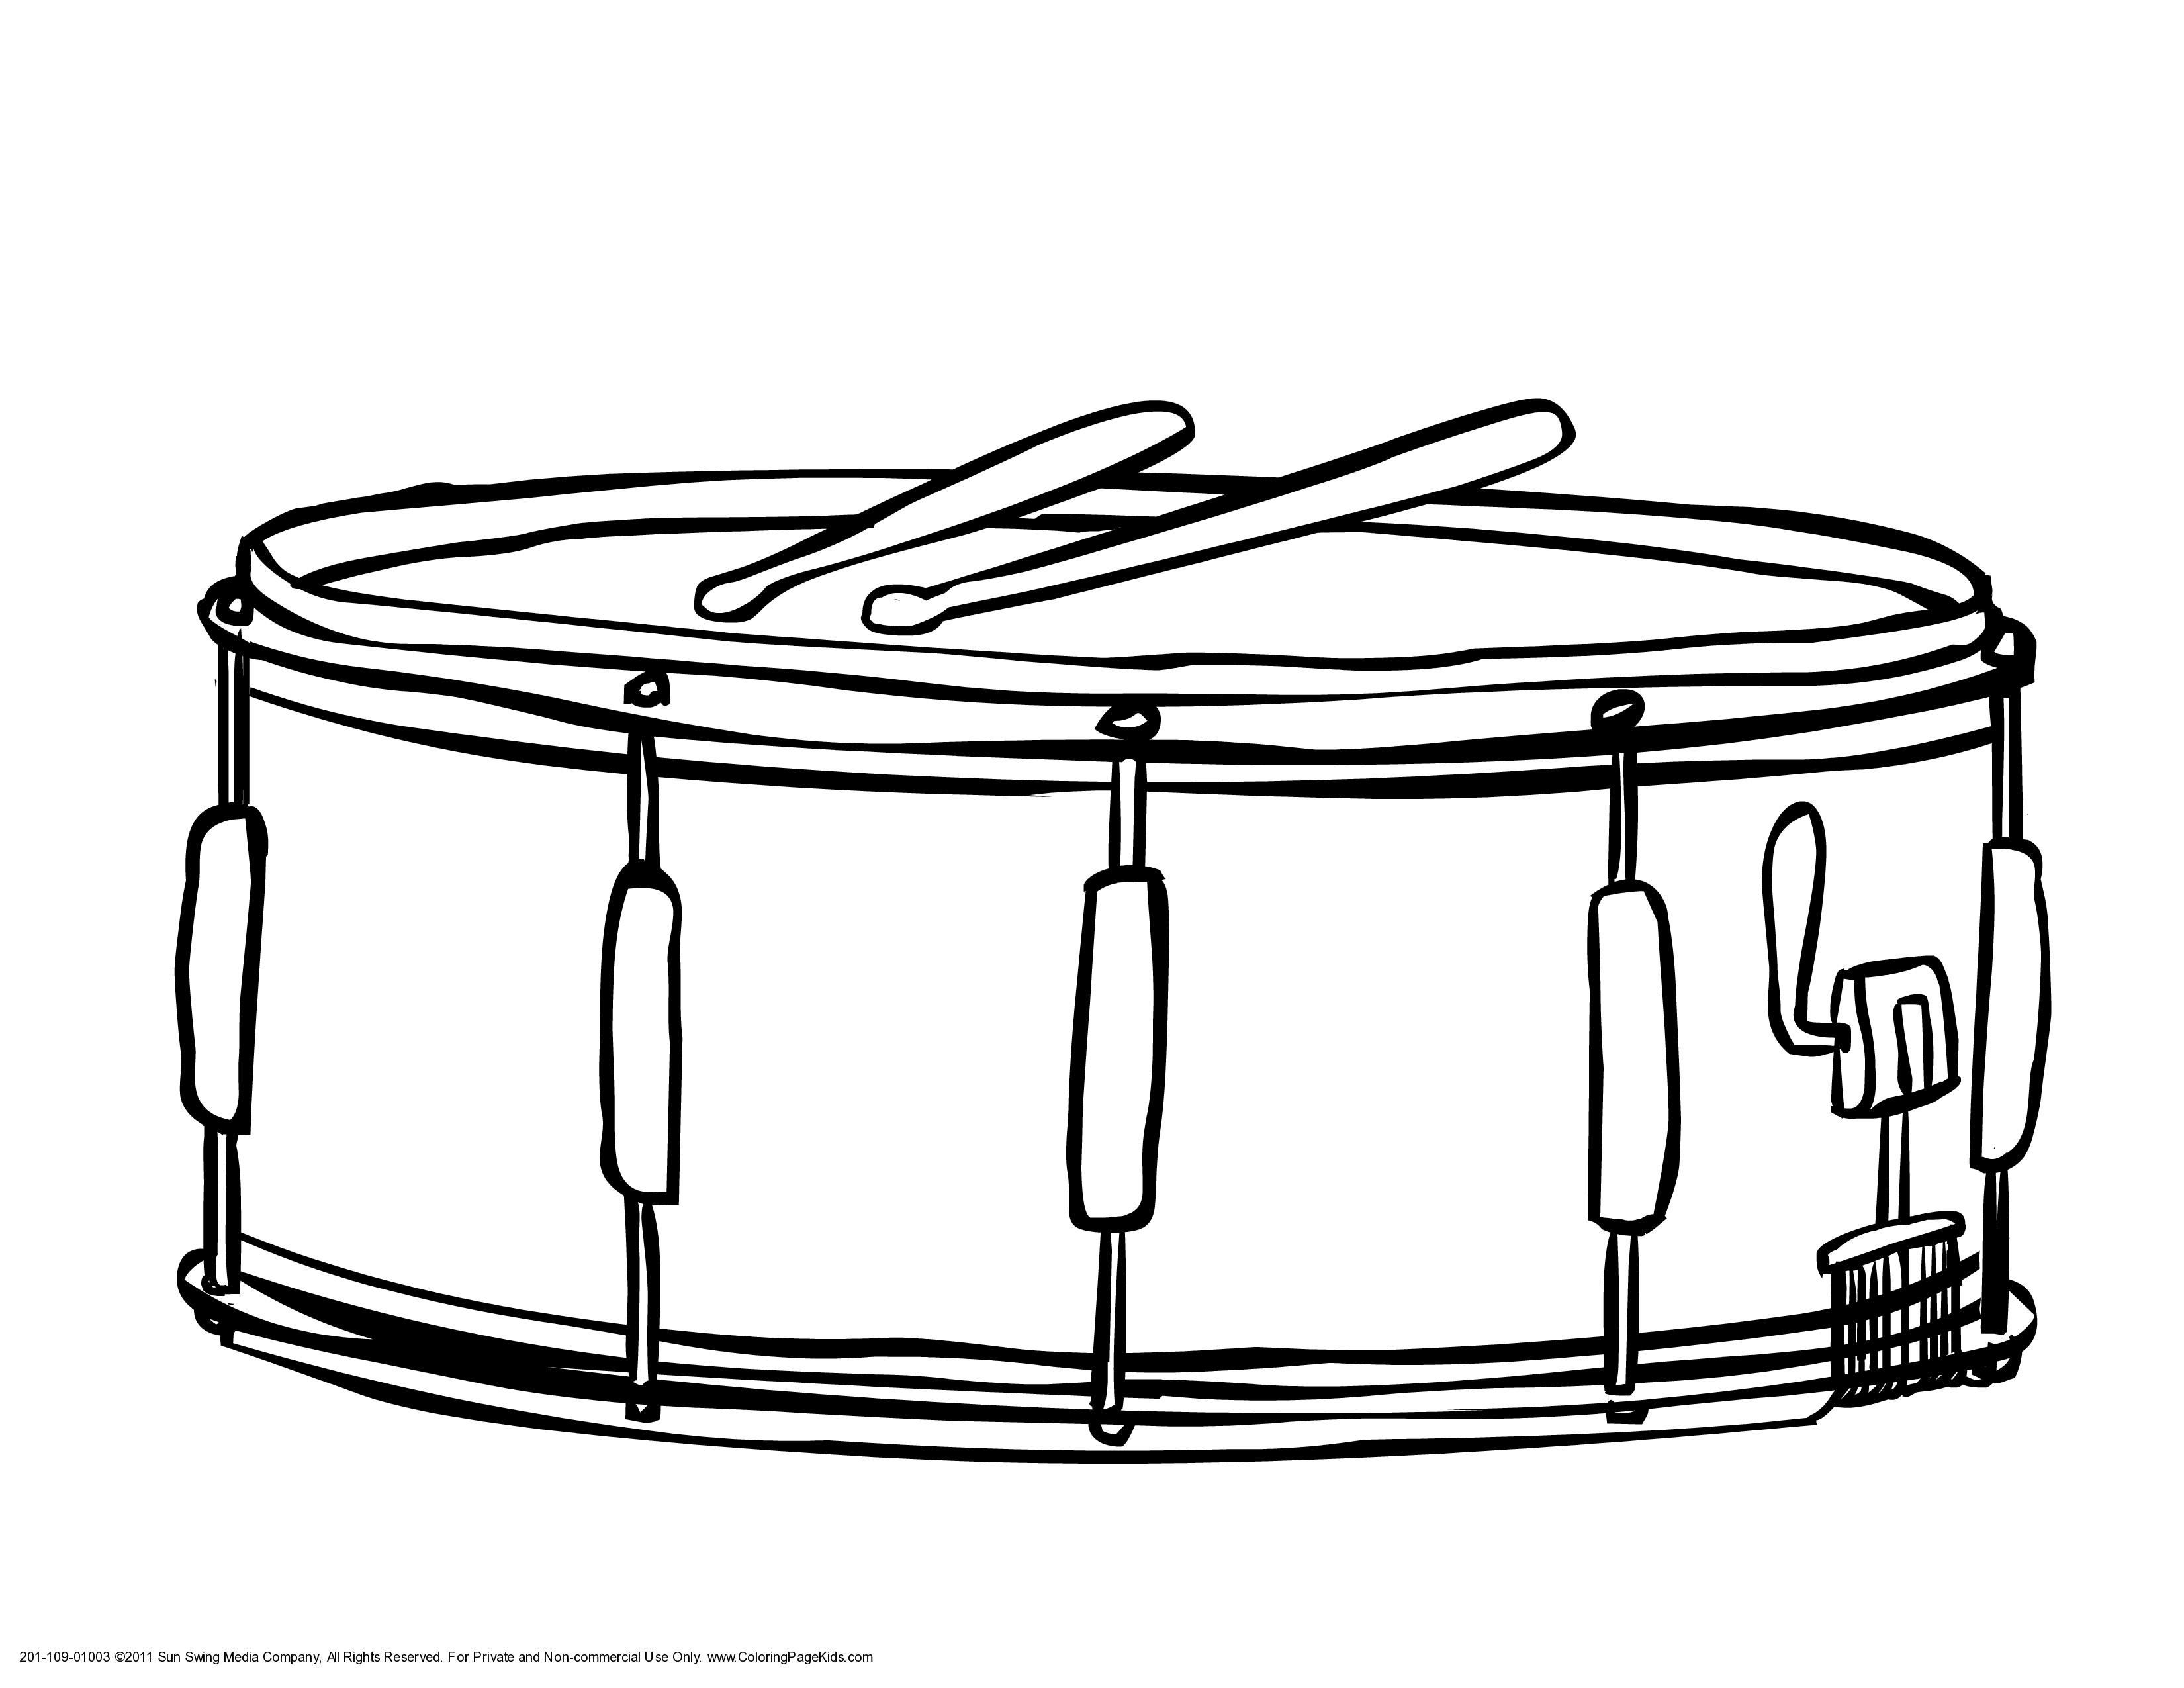 xylophone clipart black and white - photo #19